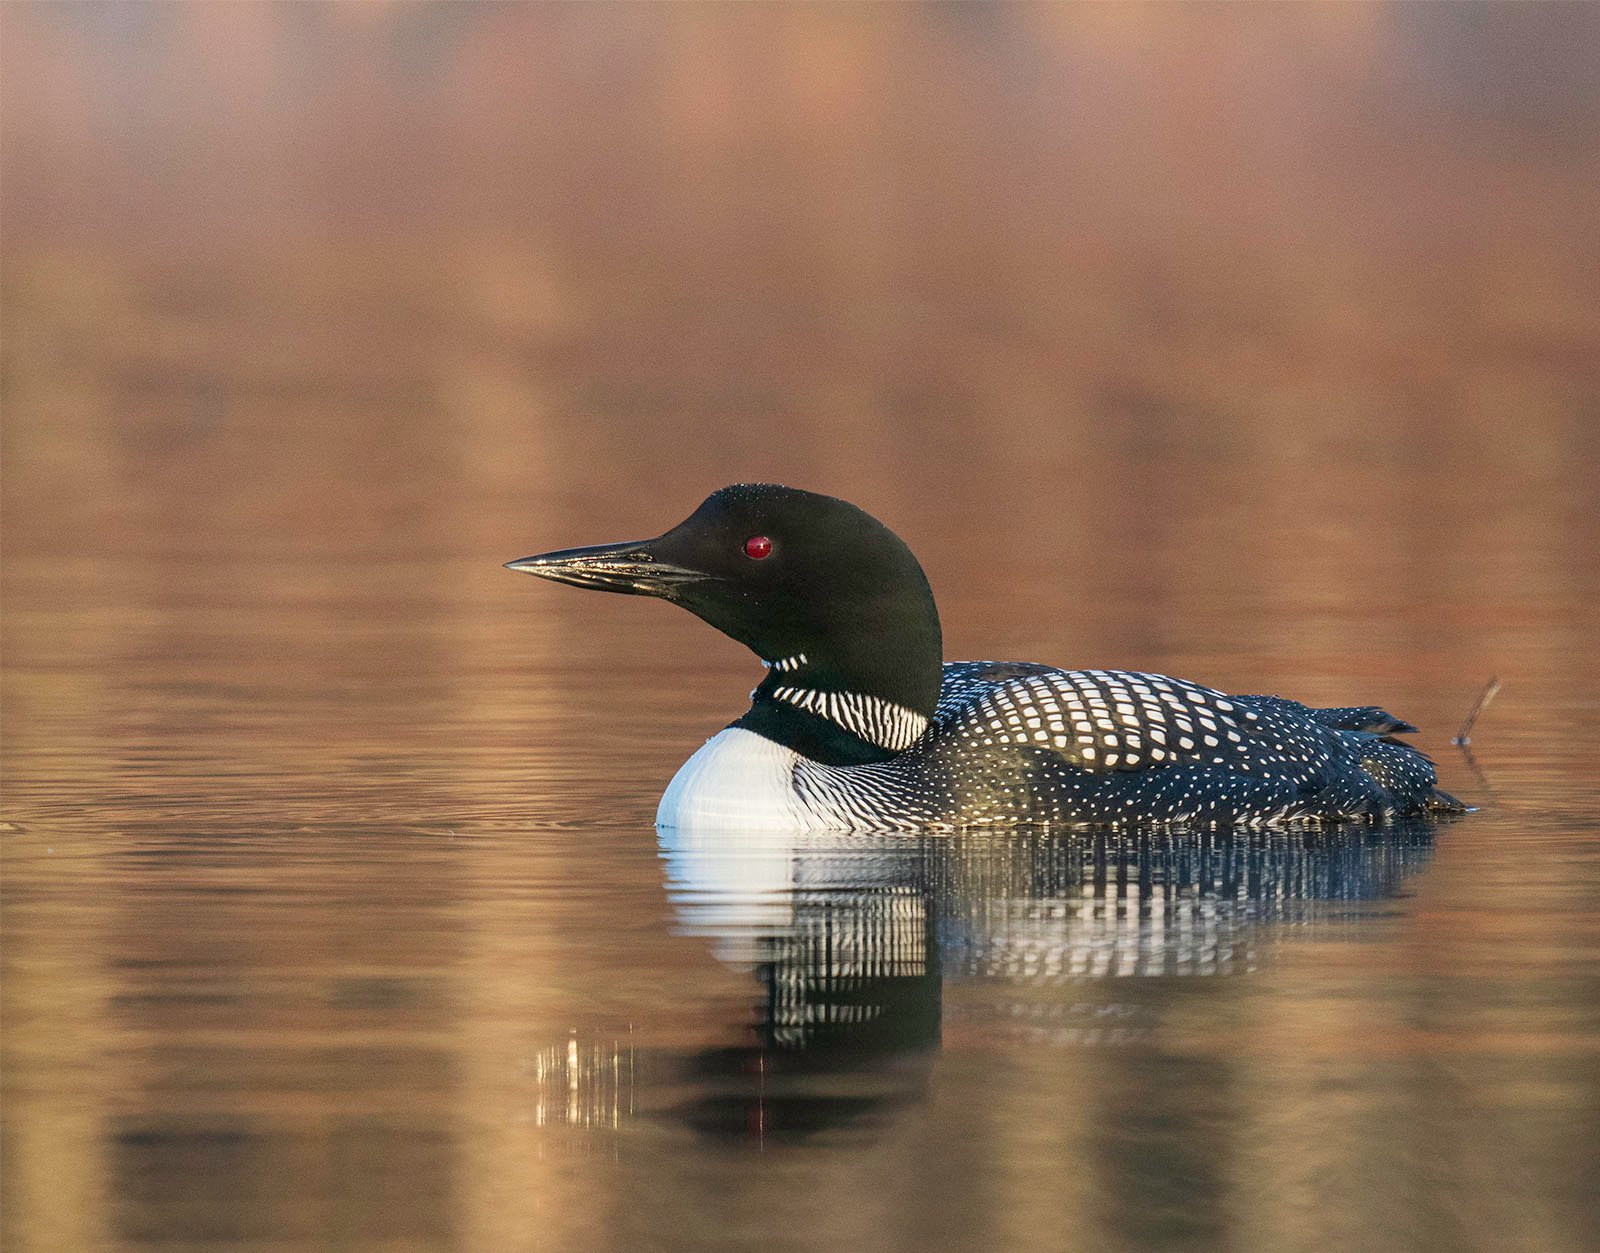 A common loon with striking black and white plumage swims on a tranquil golden-hued lake, its red eyes prominent.